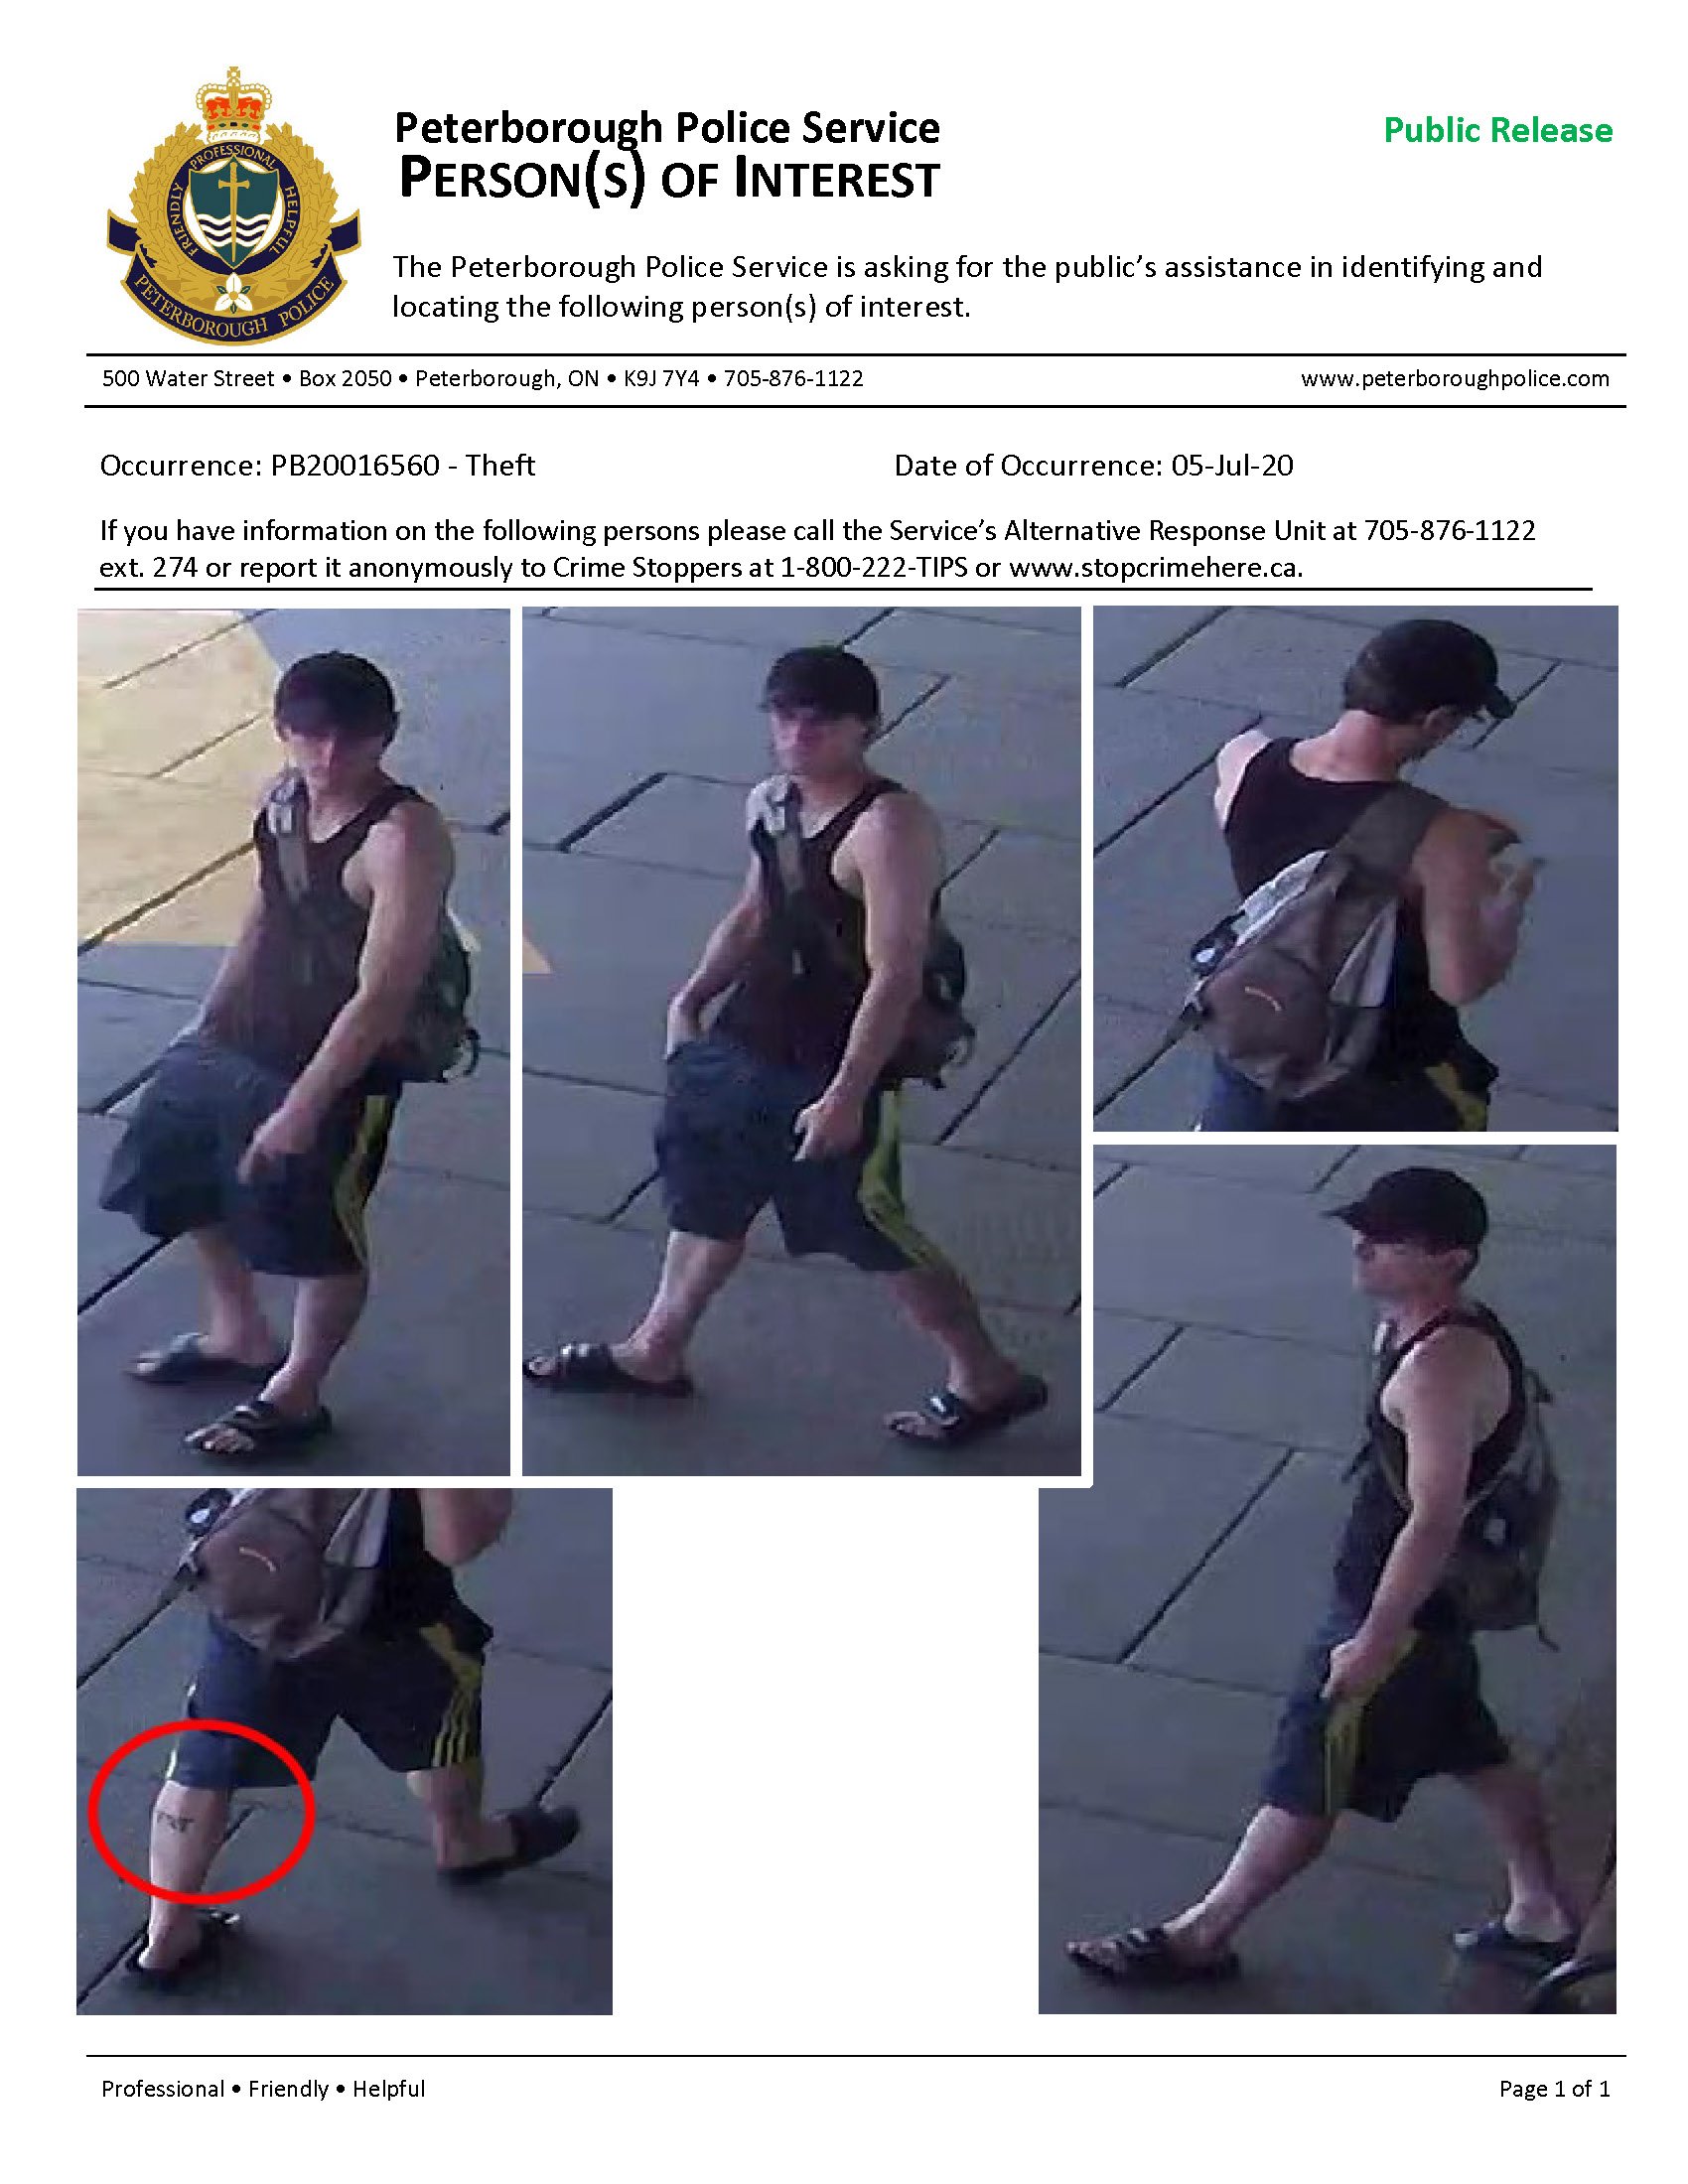 Persons of interest poster of a man in a tank top and shorts with a hat on